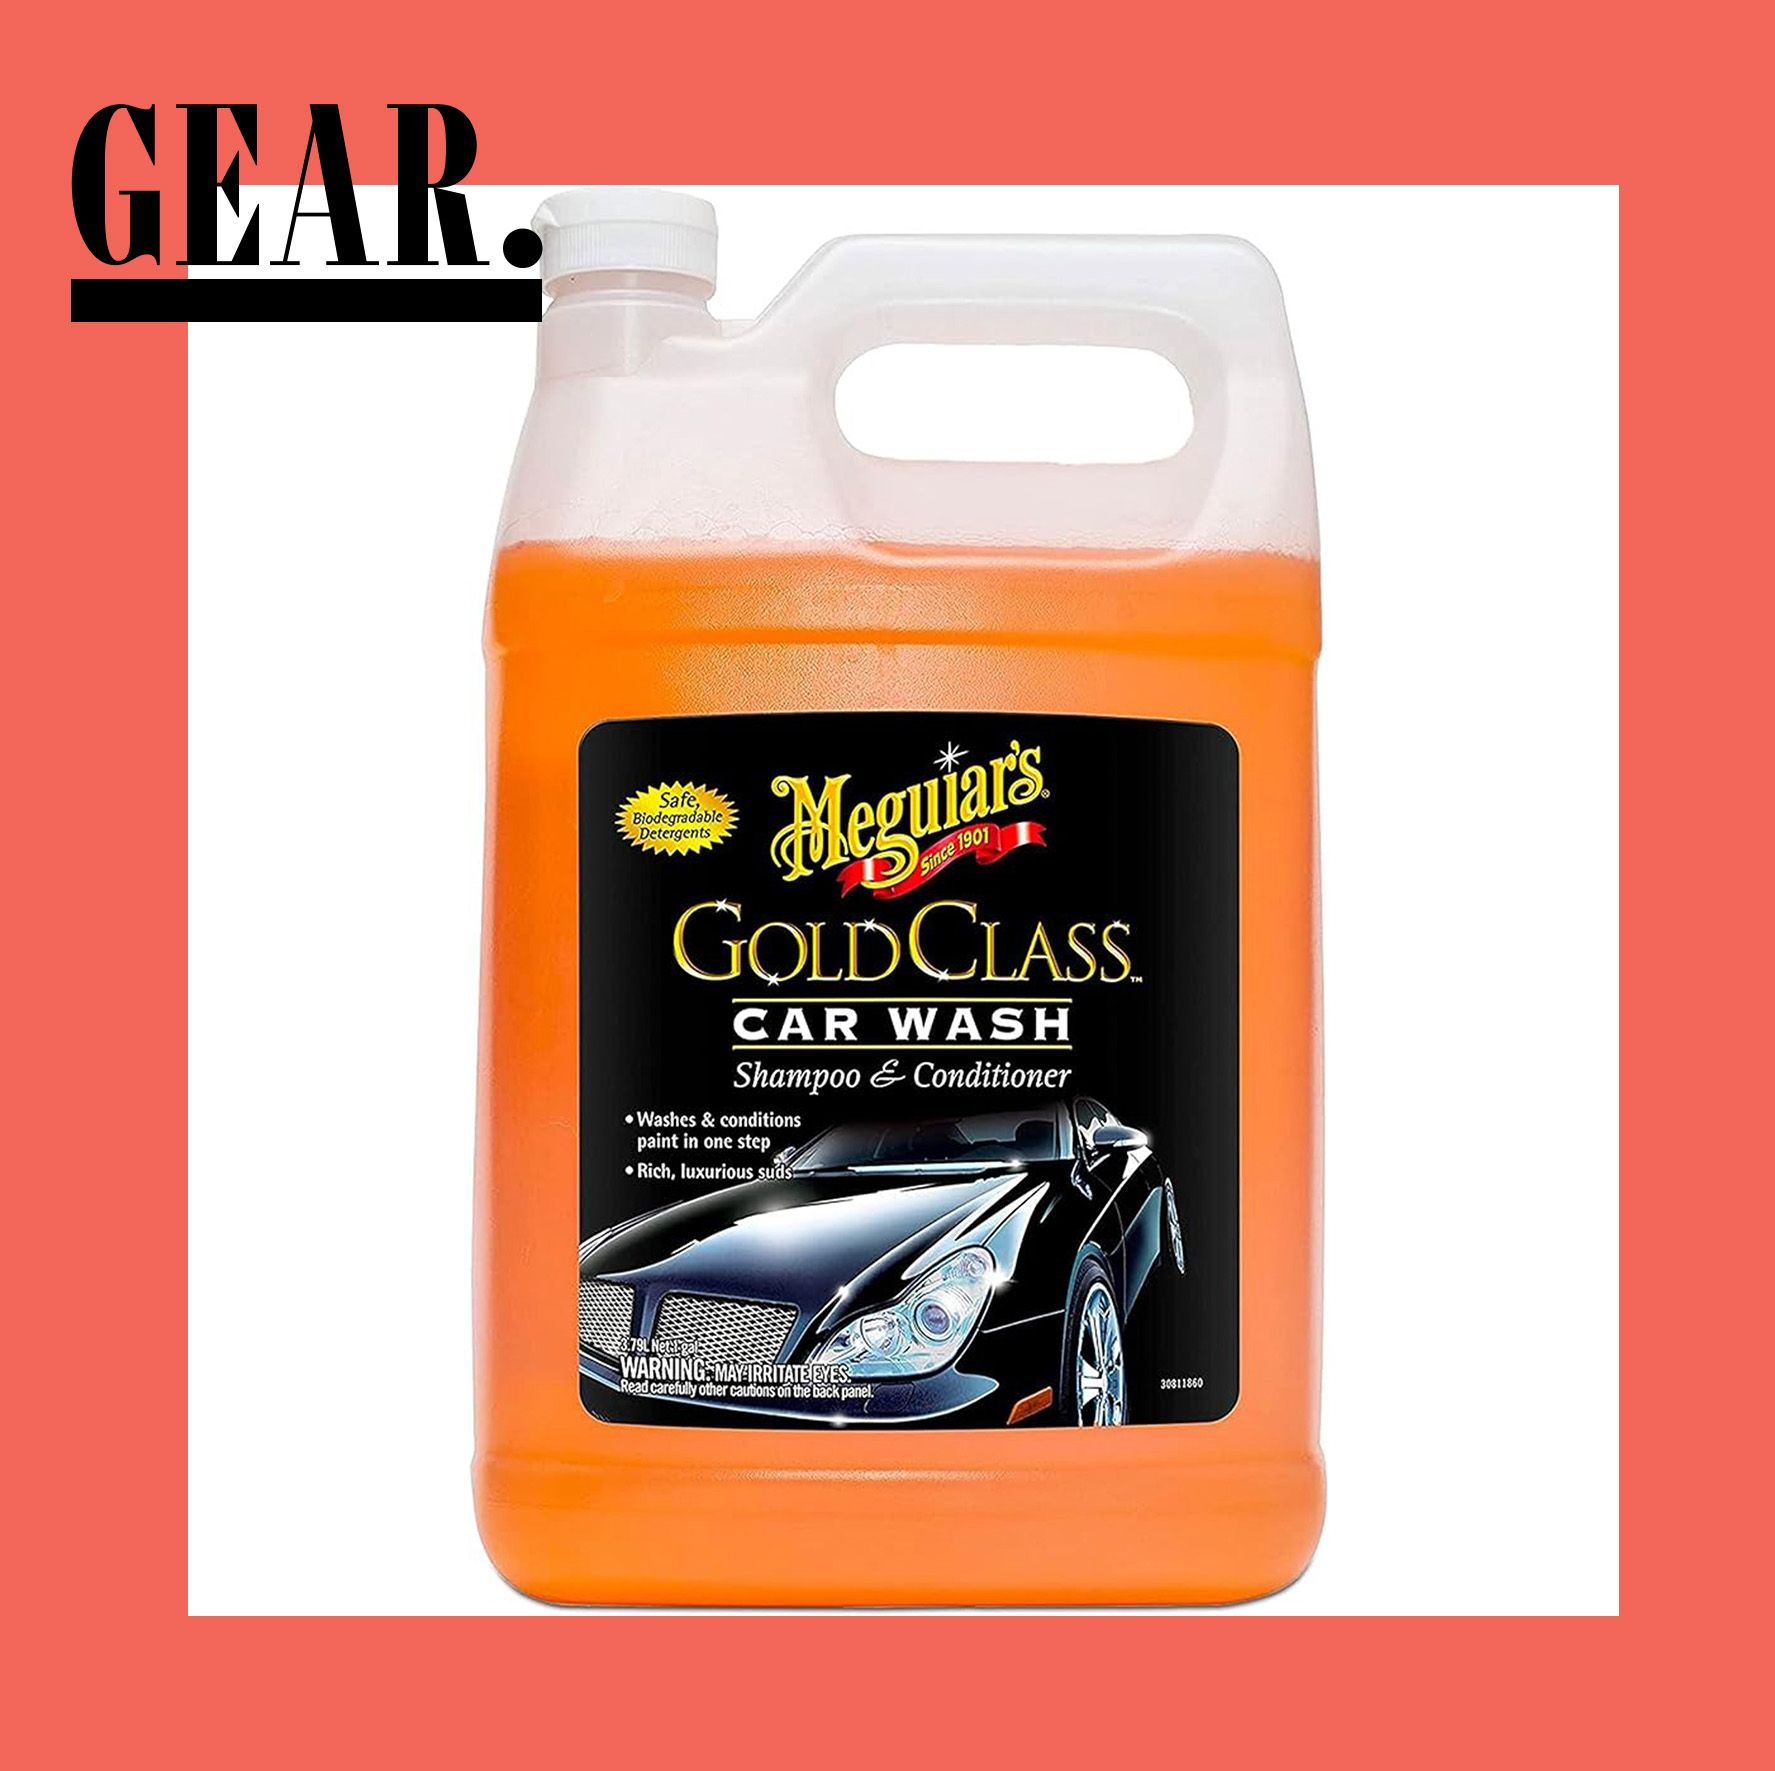 Our Picks for the Best Car Cleaning Products